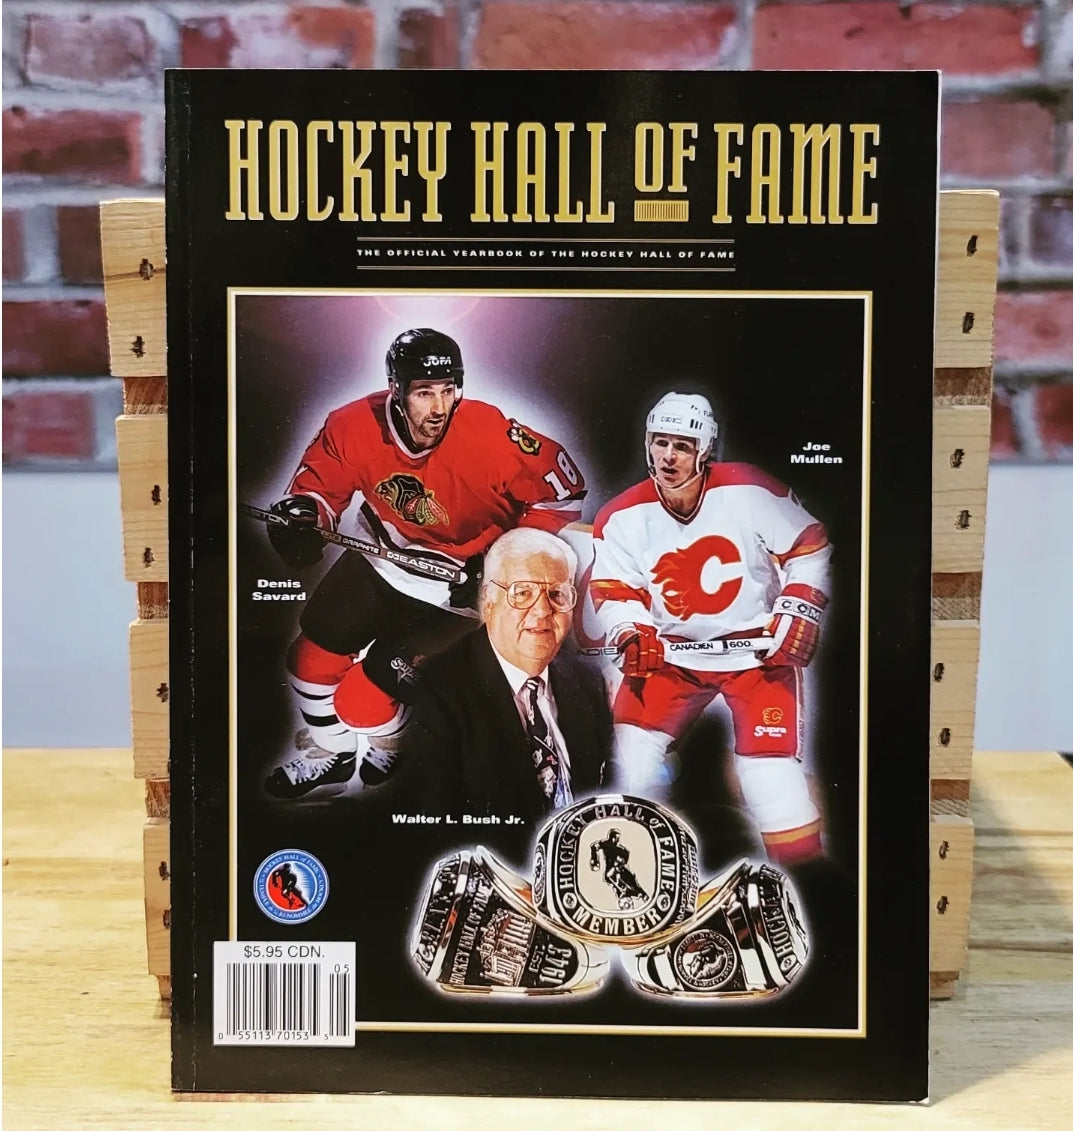 2000 NHL Hockey Hall Of Fame Official Yearbook